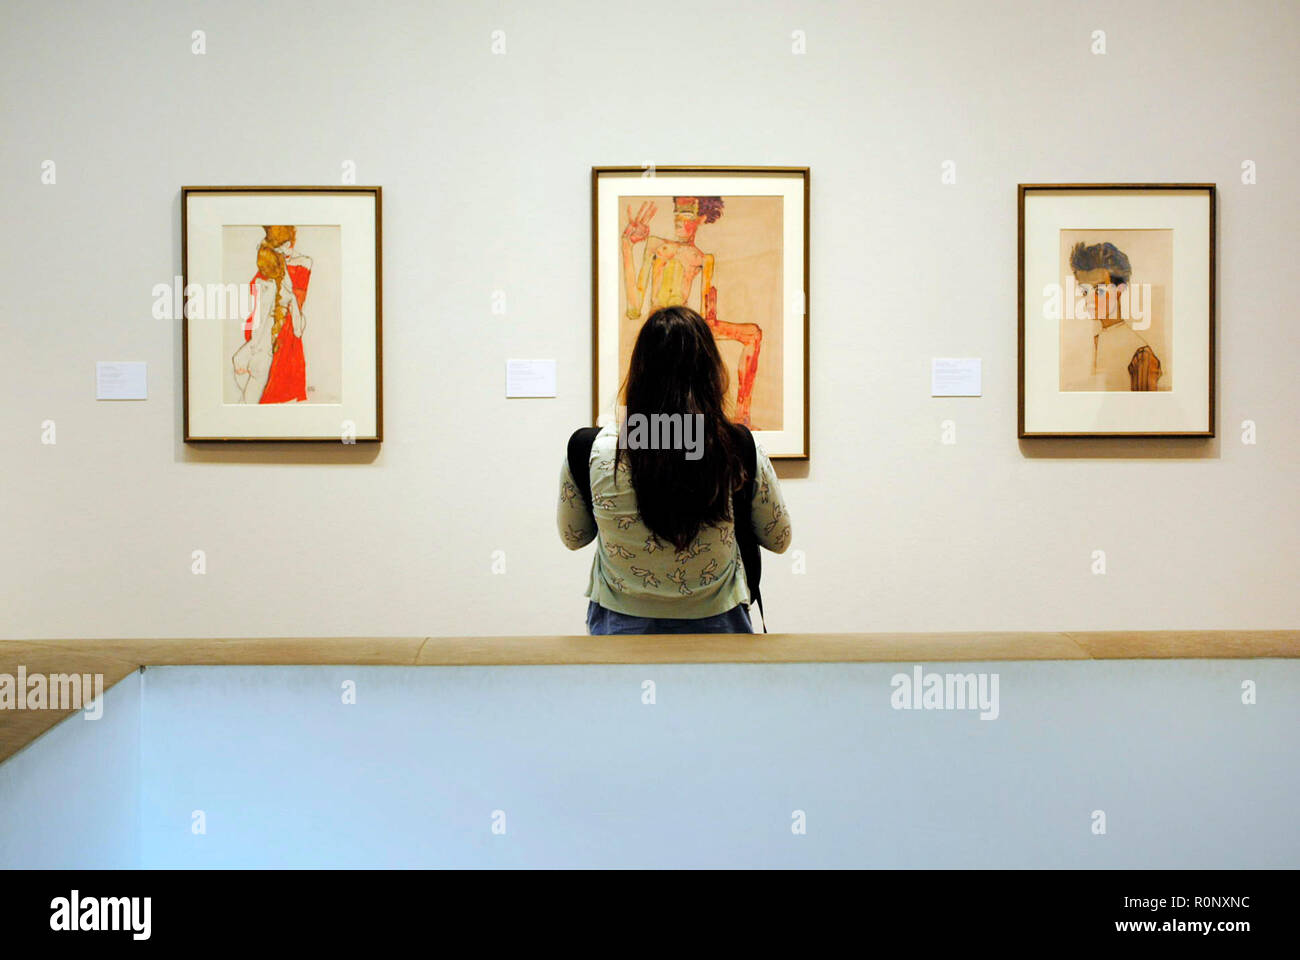 Austria. Vienna. Leopold Museum. Woman contemplating Egon Schiele painting in a museum room dedicated to this Austrian Expressionist painter. Egon Schiele (1890-1918). Stock Photo